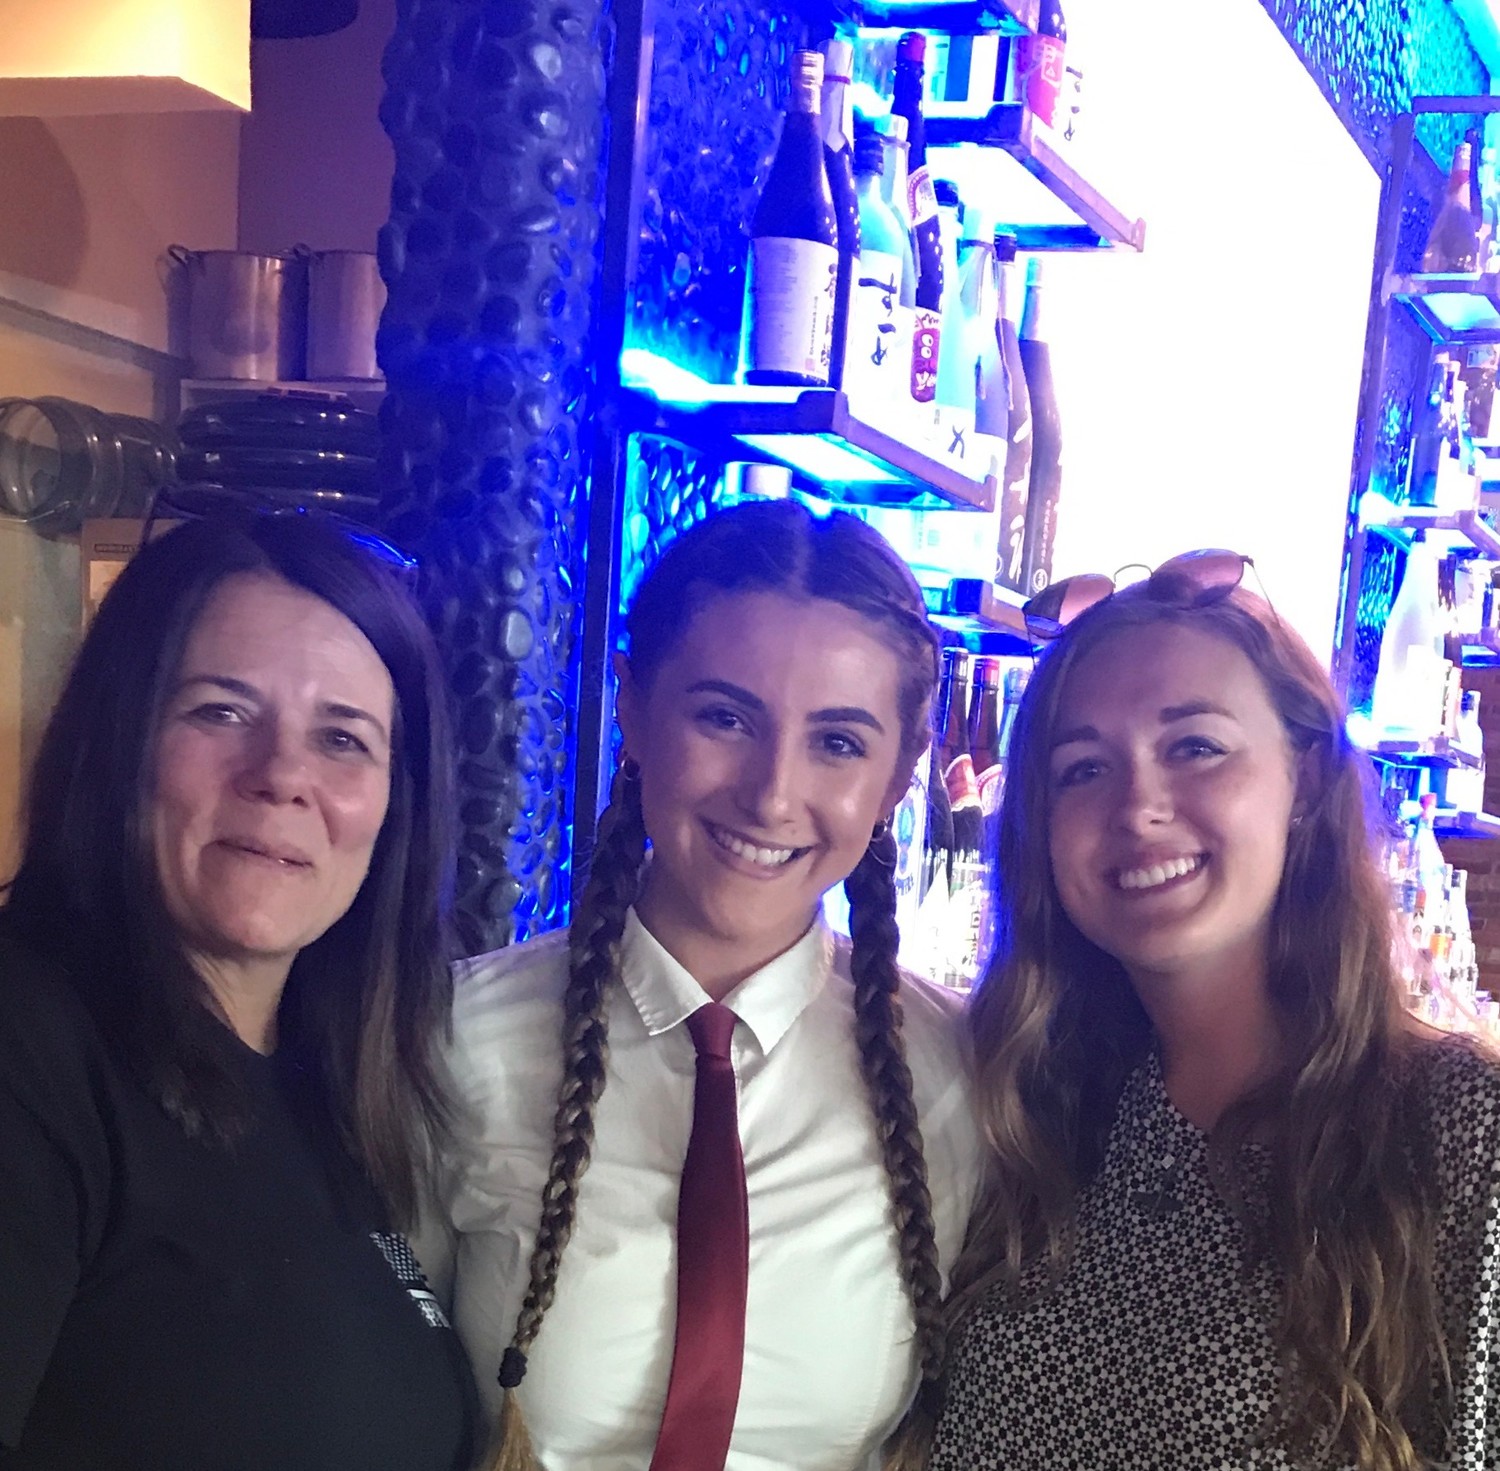 Suzanne Coletta-Knab, left, and her friend Jayden Lancaster, right, with Stephanie D’Agostino, a graduate of Marjory Stoneman Douglas High School in Parkland, Fla., whose brother was at the school during the shooting. Coletta-Knab gave D’Agostino #Honor17 bracelets in memory of Parkland survivors.